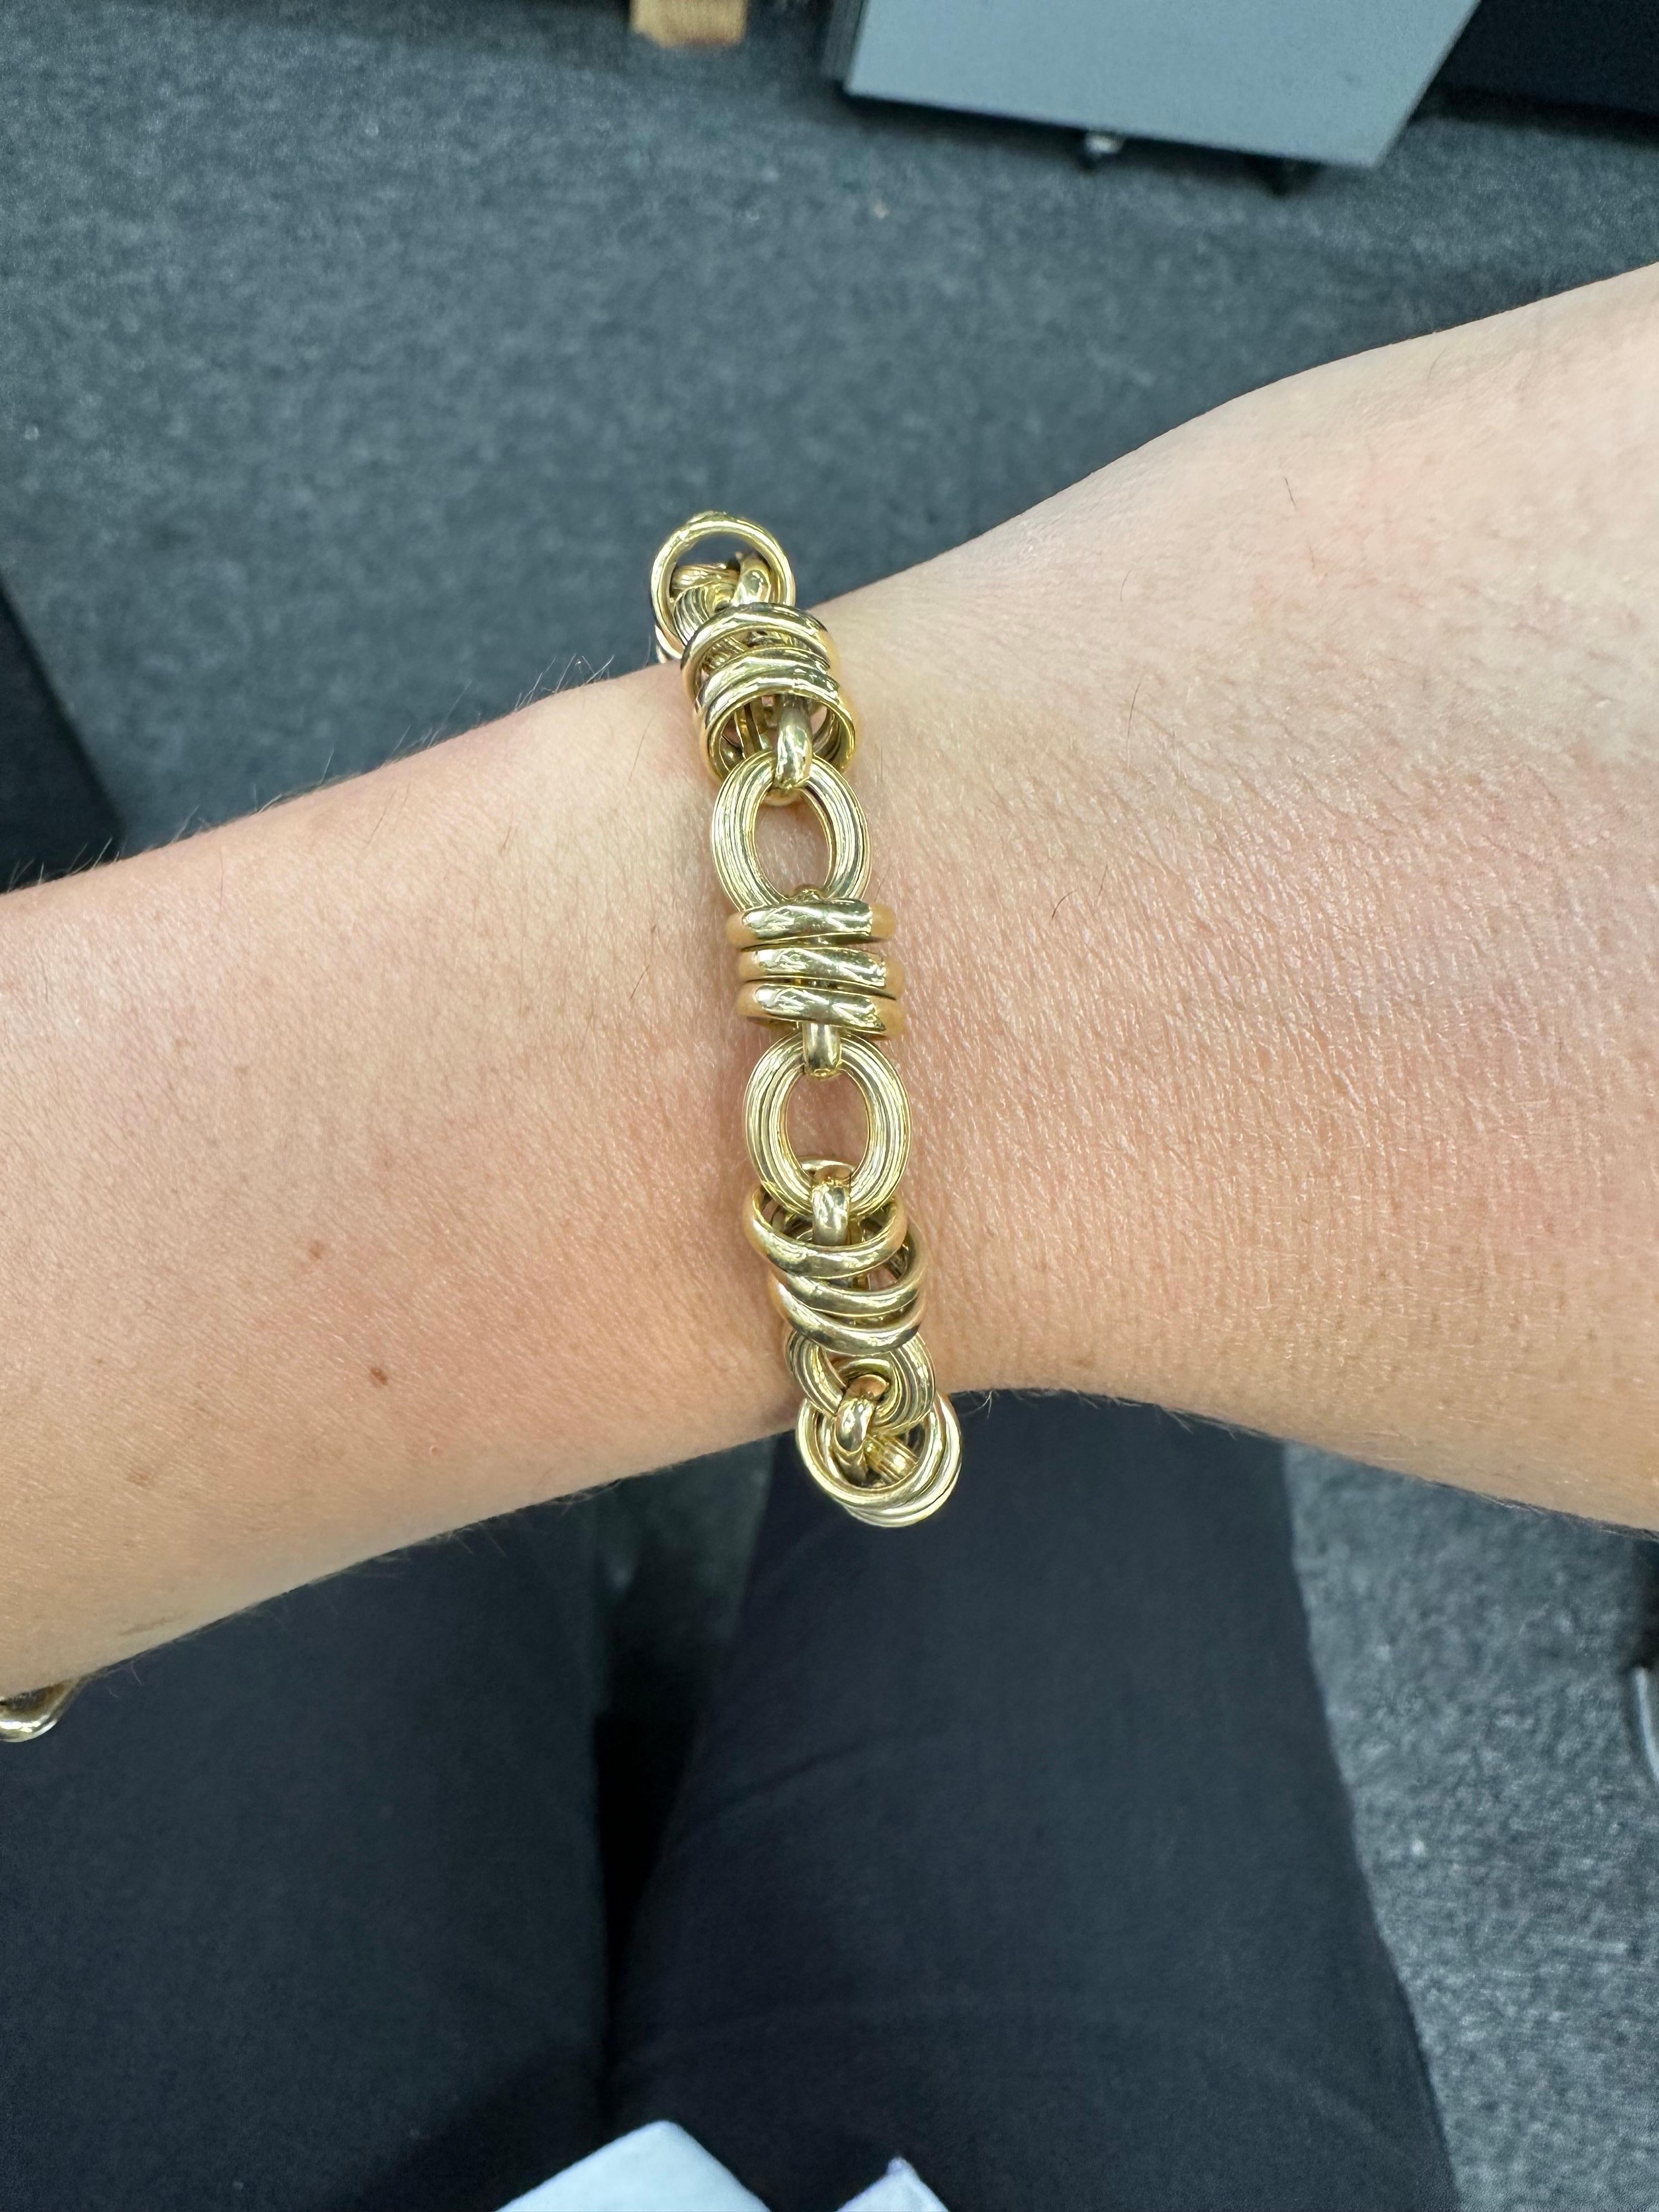 Toggle link bracelet weighing 24.04 grams in 14 Karat Yellow Gold.
Great for layering or wearing alone.
More link bracelets available
Search Harbor Diamonds
